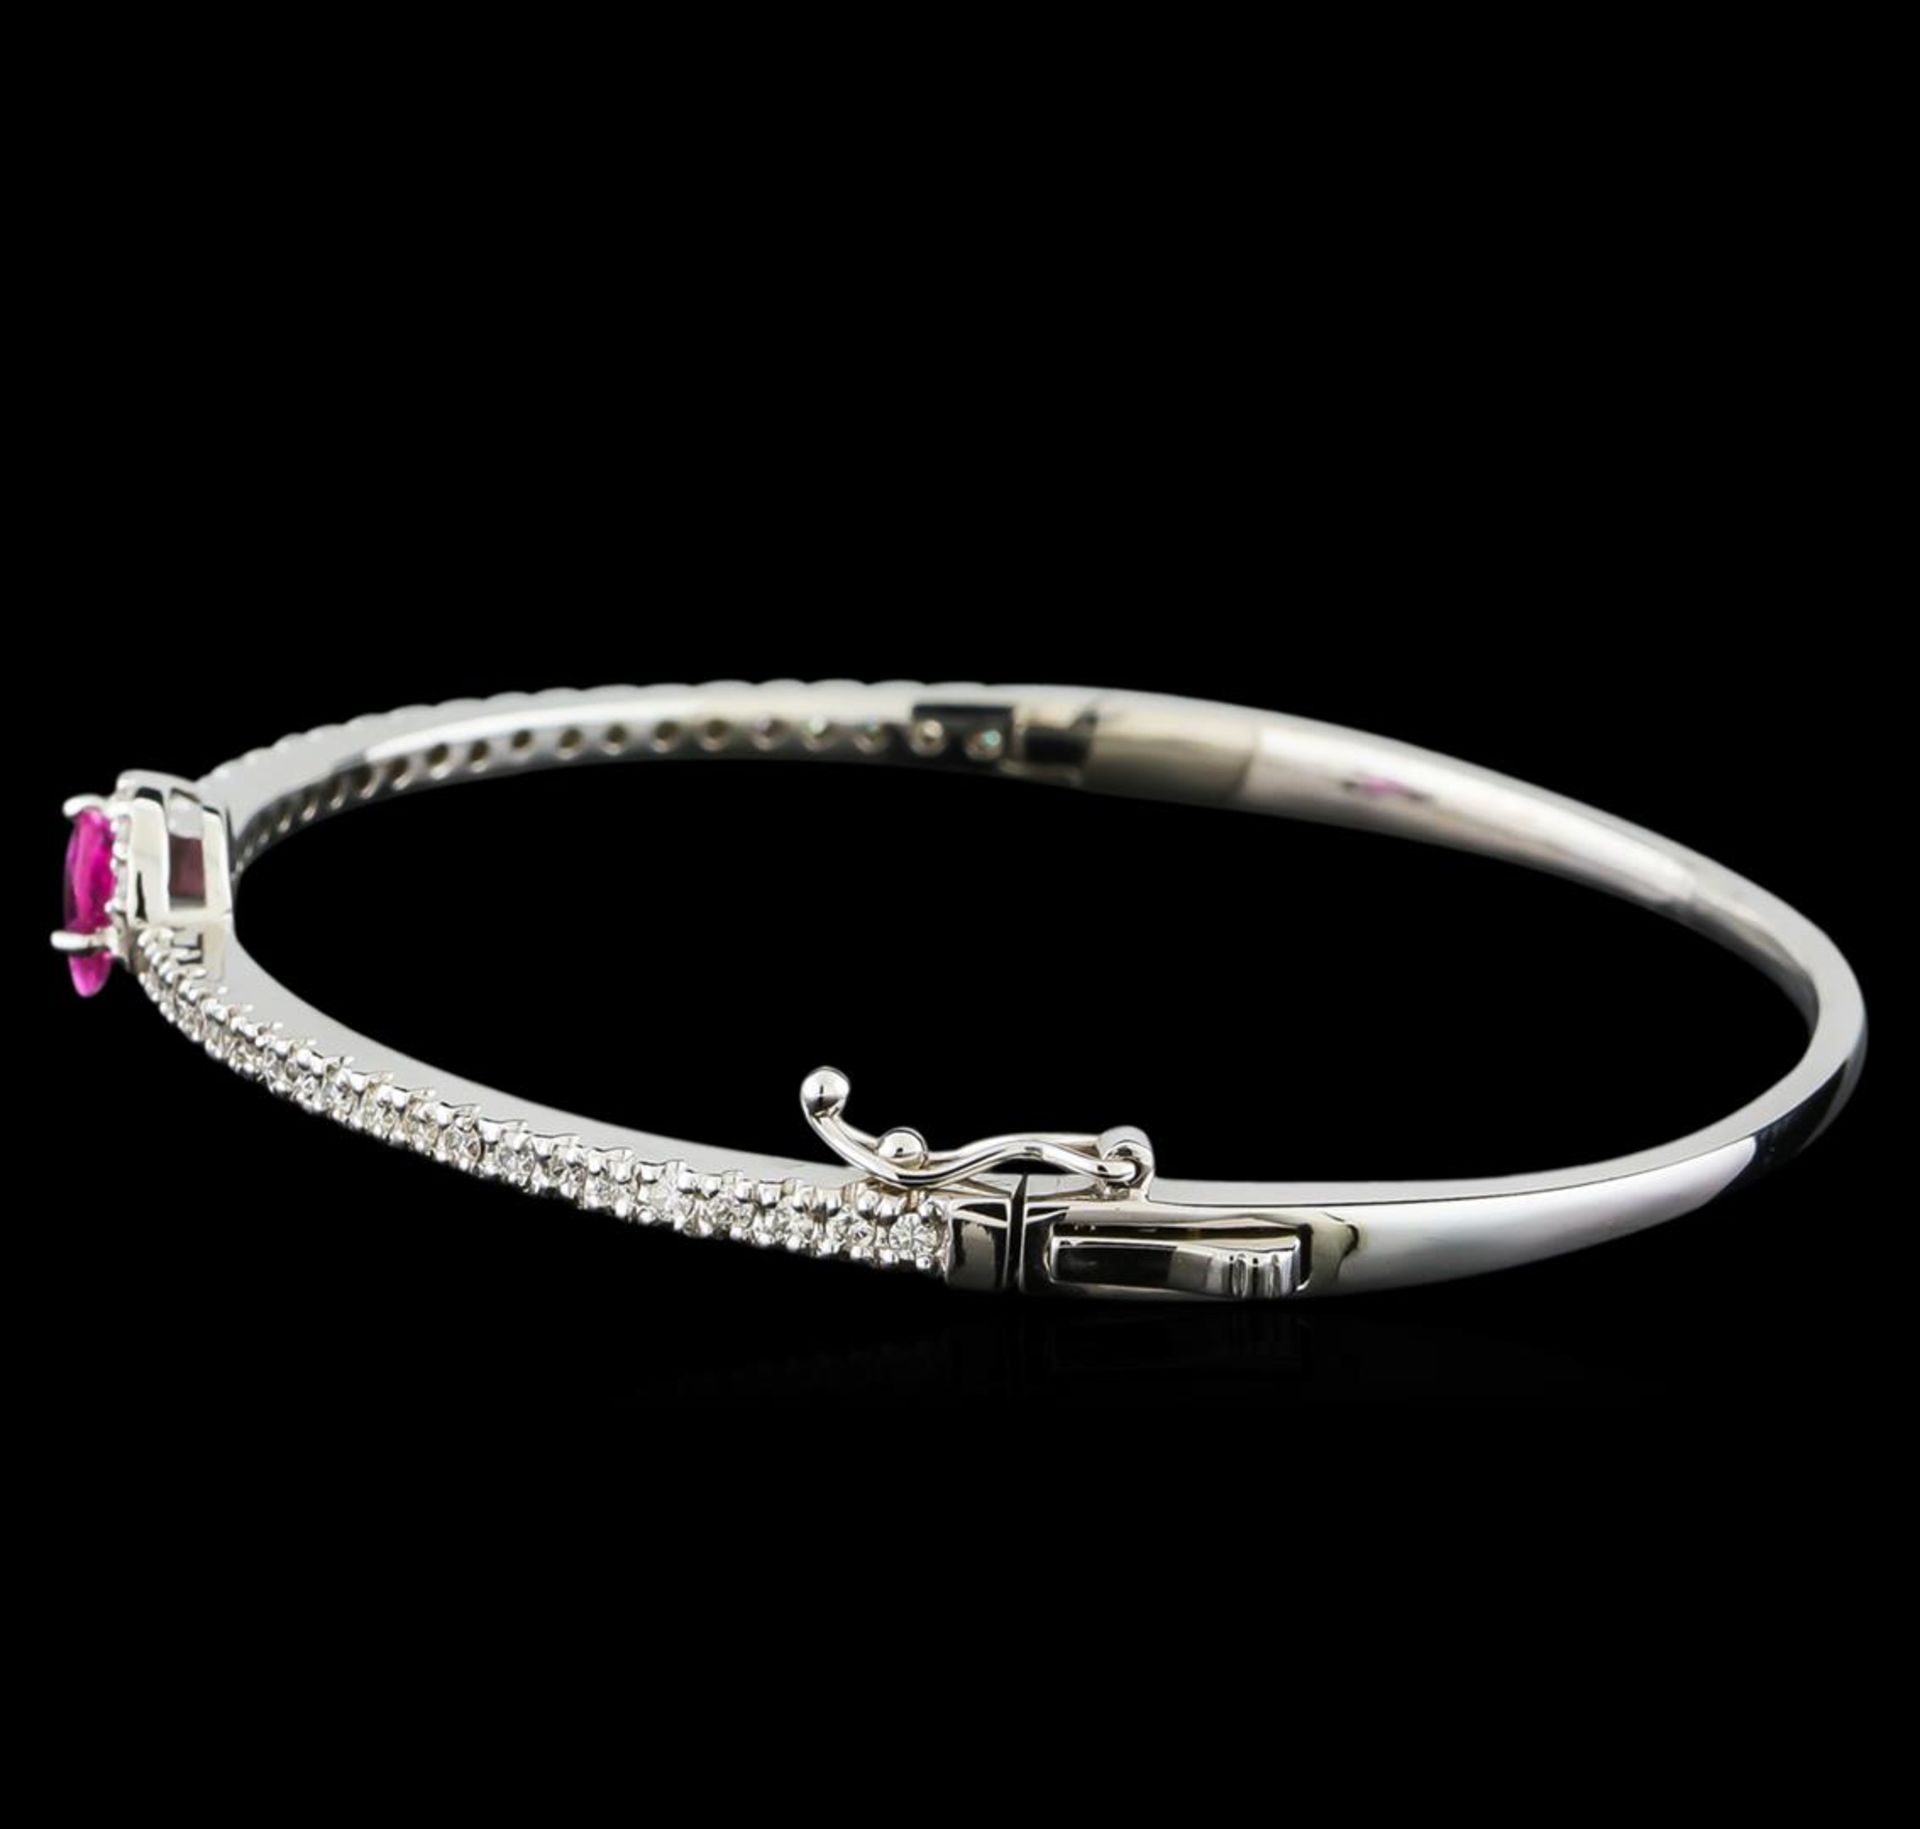 1.08 ctw Pink Sapphire and Diamond Bracelet - 14KT White Gold - Image 2 of 4